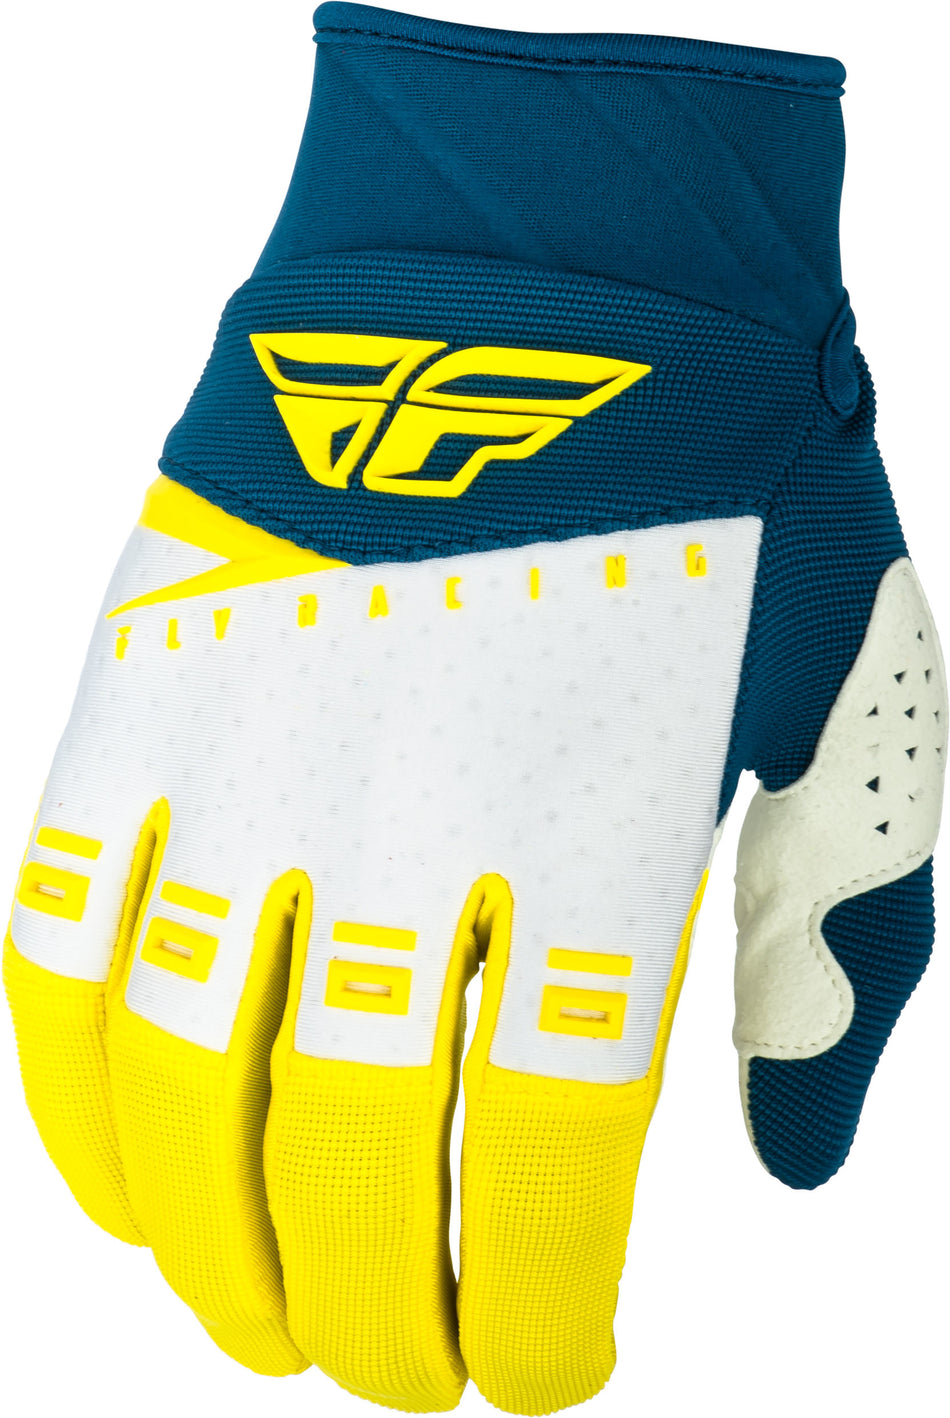 FLY RACING F-16 Gloves Yellow/White/Navy Sz 04 372-91304